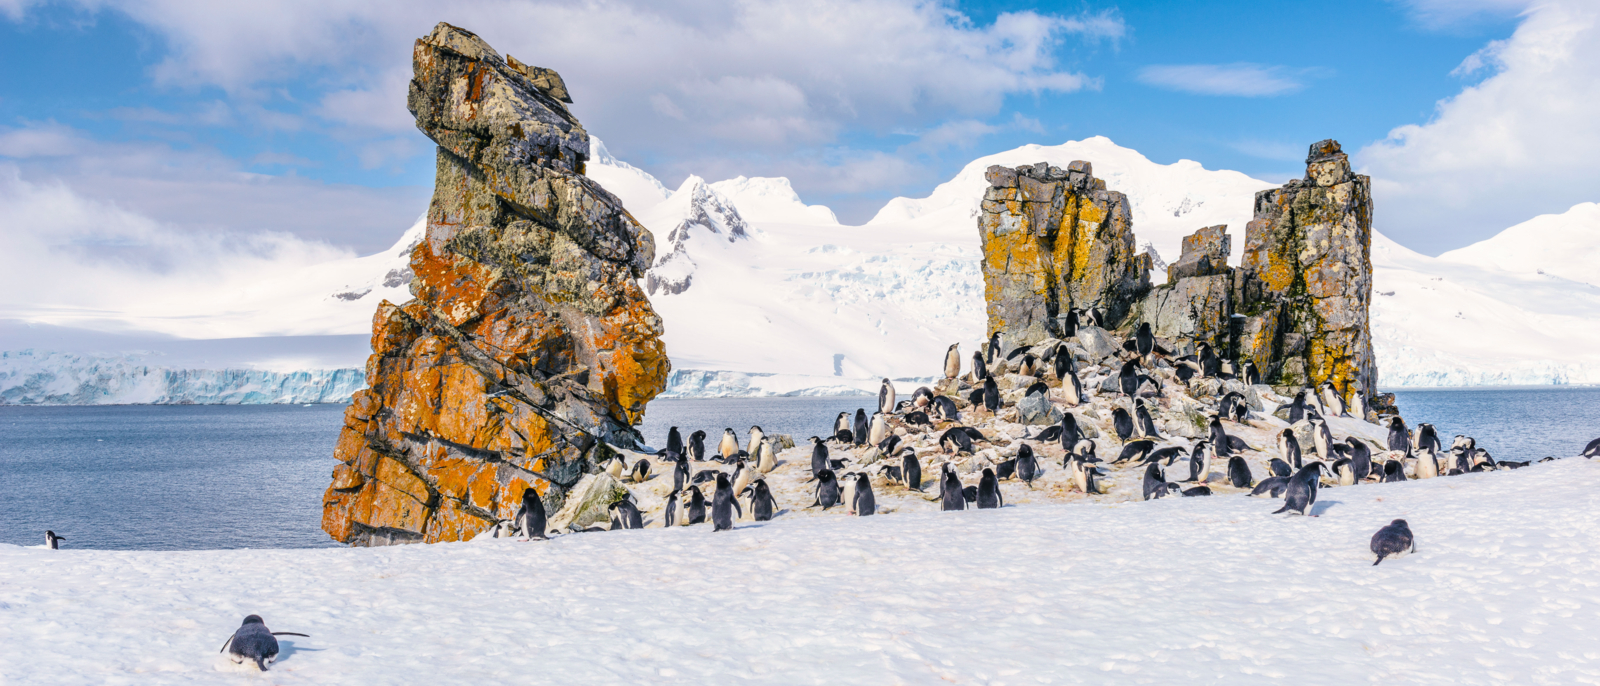 Chinstrap Penguins (Pygoscelis antarctica) and a rock in Half Moon Island of the South Shetland Islands